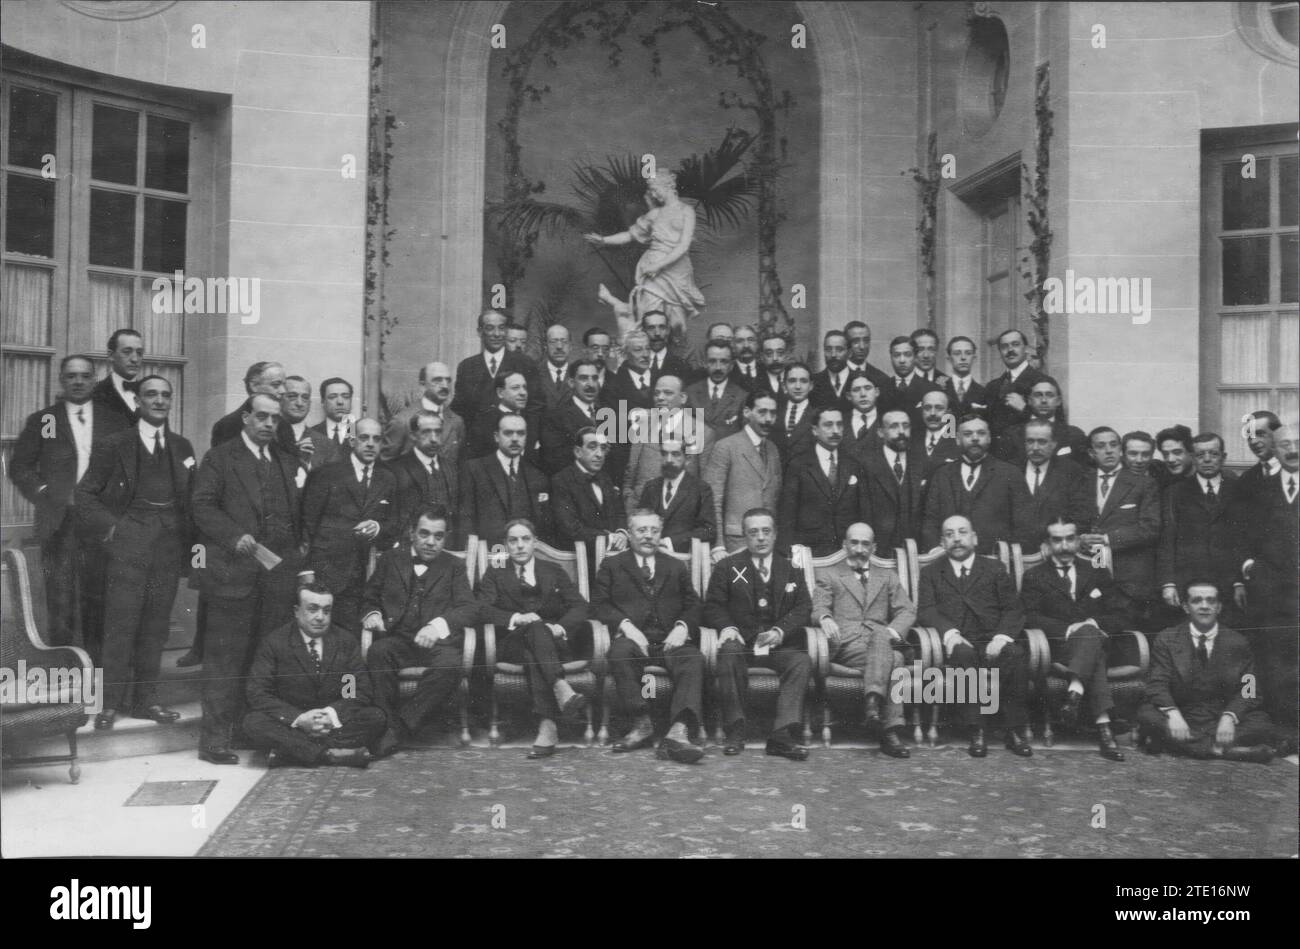 04/12/1919. Madrid. At the Ritz hotel. The distinguished actor Francisco Morano (X) with the attendees at the banquet given yesterday in his honor. Credit: Album / Archivo ABC / Julio Duque Stock Photo